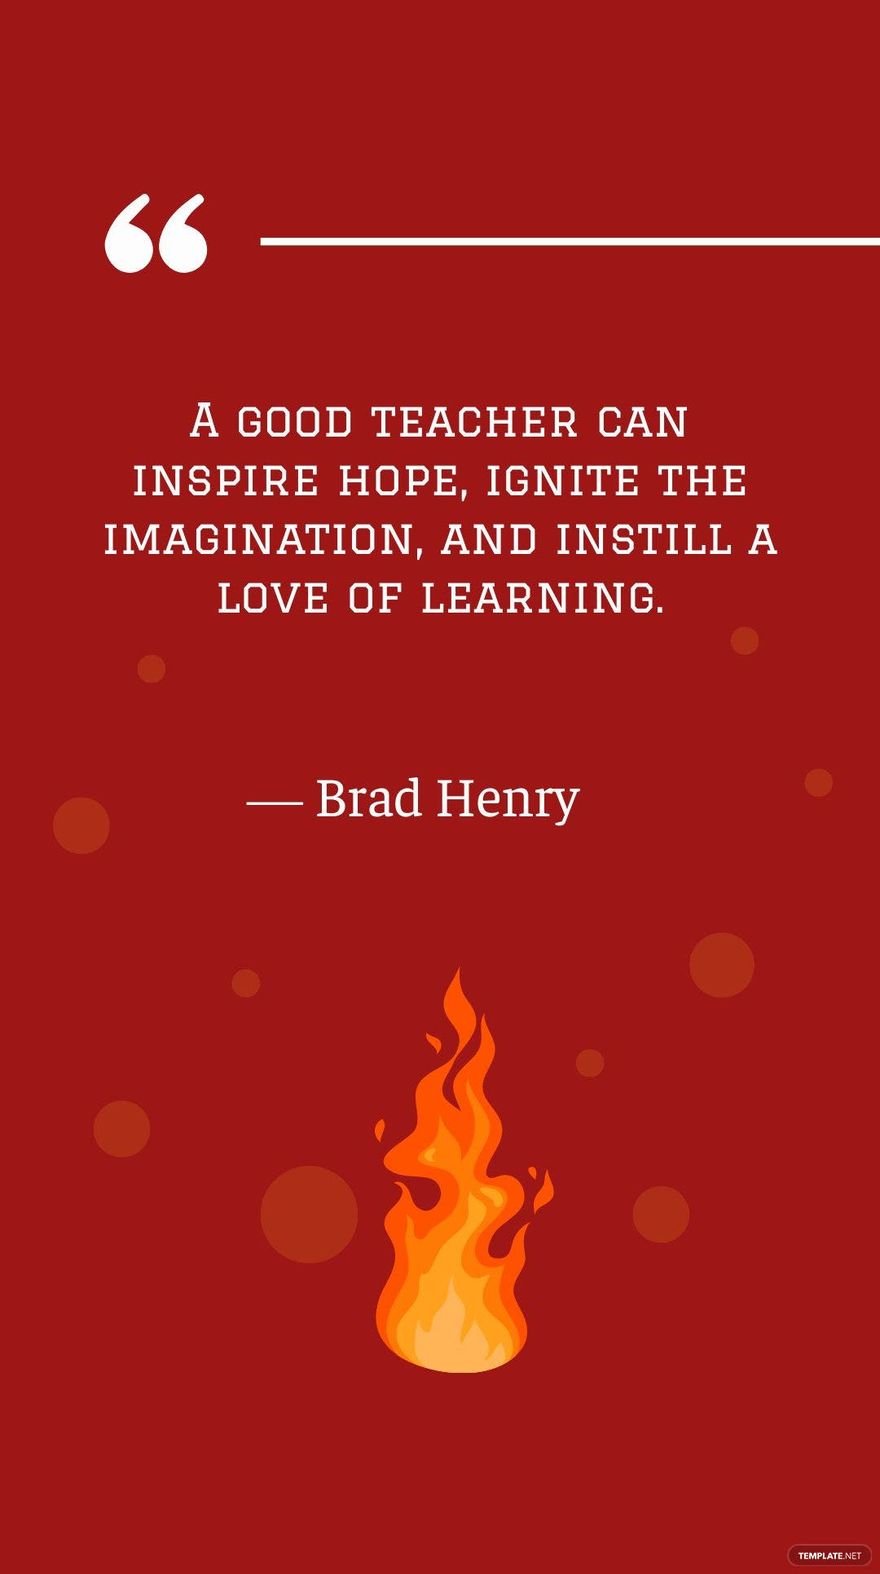 Free Brad Henry - A good teacher can inspire hope, ignite the imagination, and instill a love of learning. in JPG